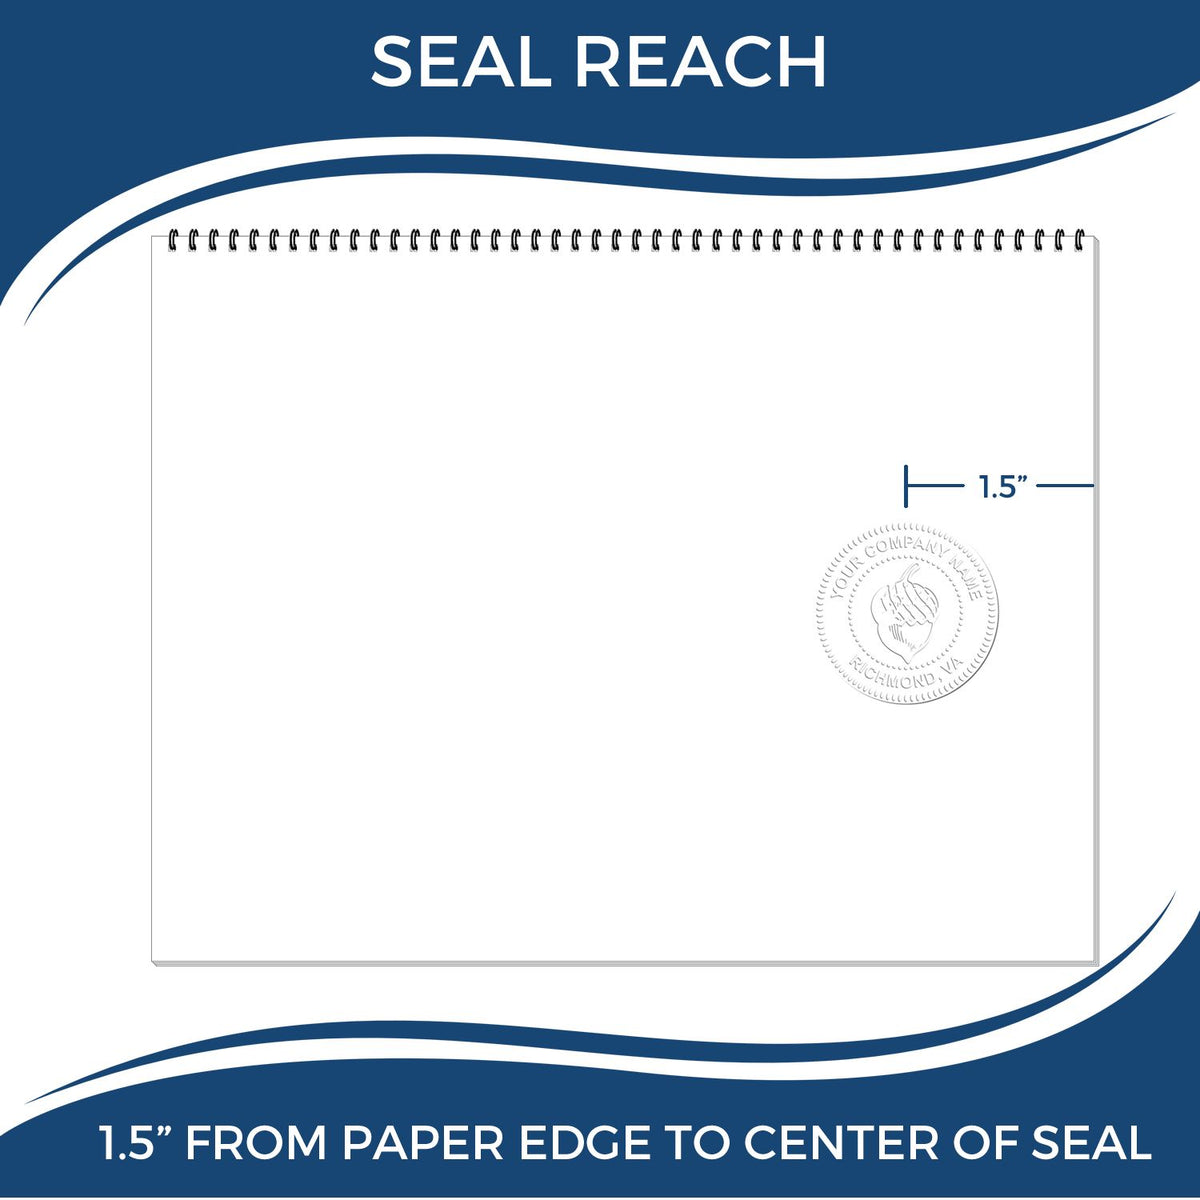 An infographic showing the seal reach which is represented by a ruler and a miniature seal image of the Gift Oklahoma Architect Seal